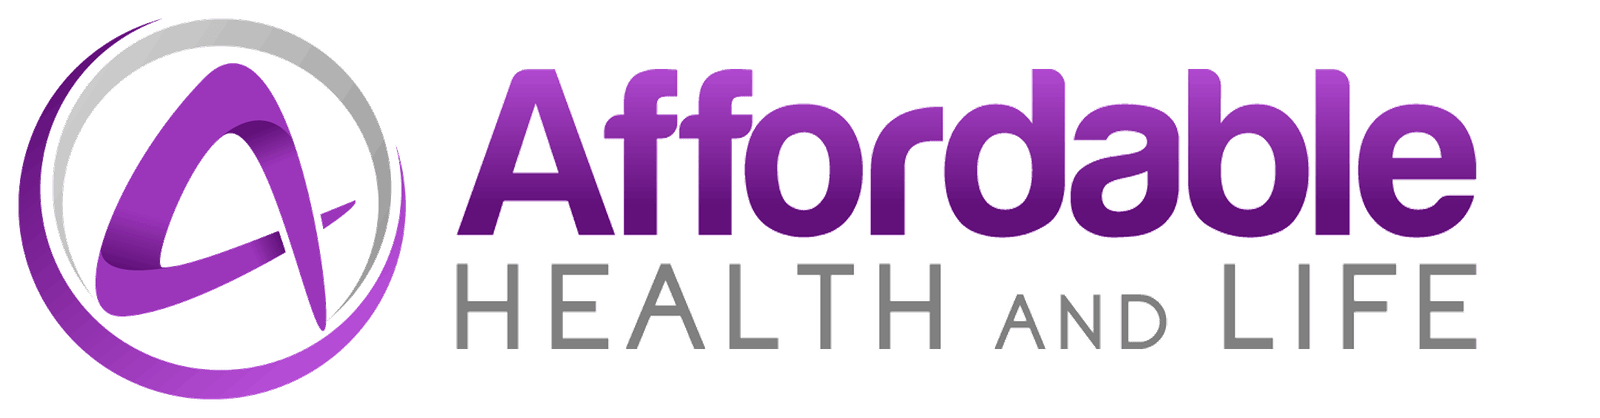 Affordable Health and Life